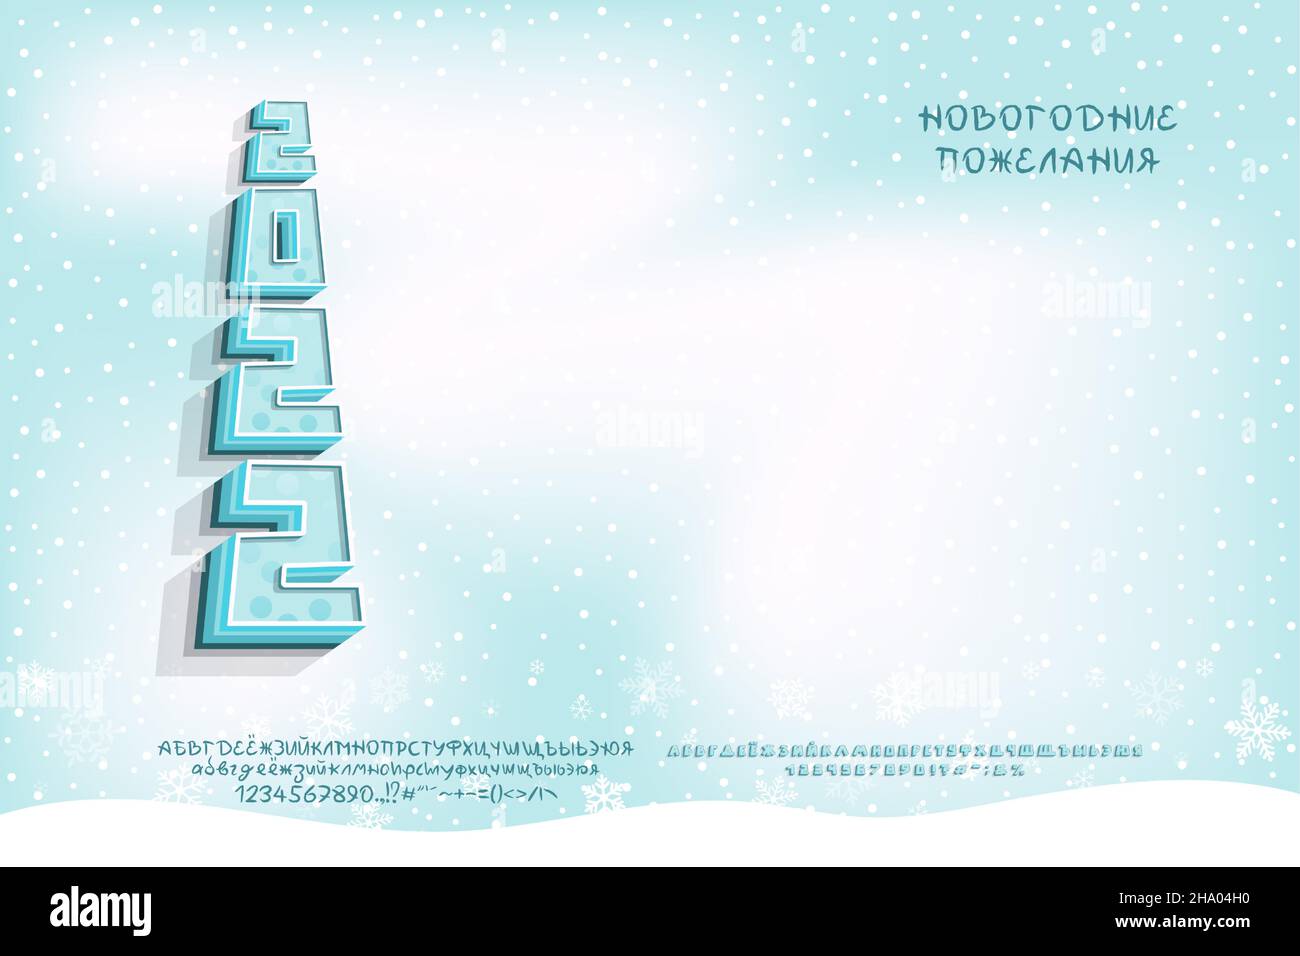 Holiday greeting card New Year wishes 2022, Russian language. Two vector Russian fonts sets are included. Translation - New Year wishes. Stock Vector